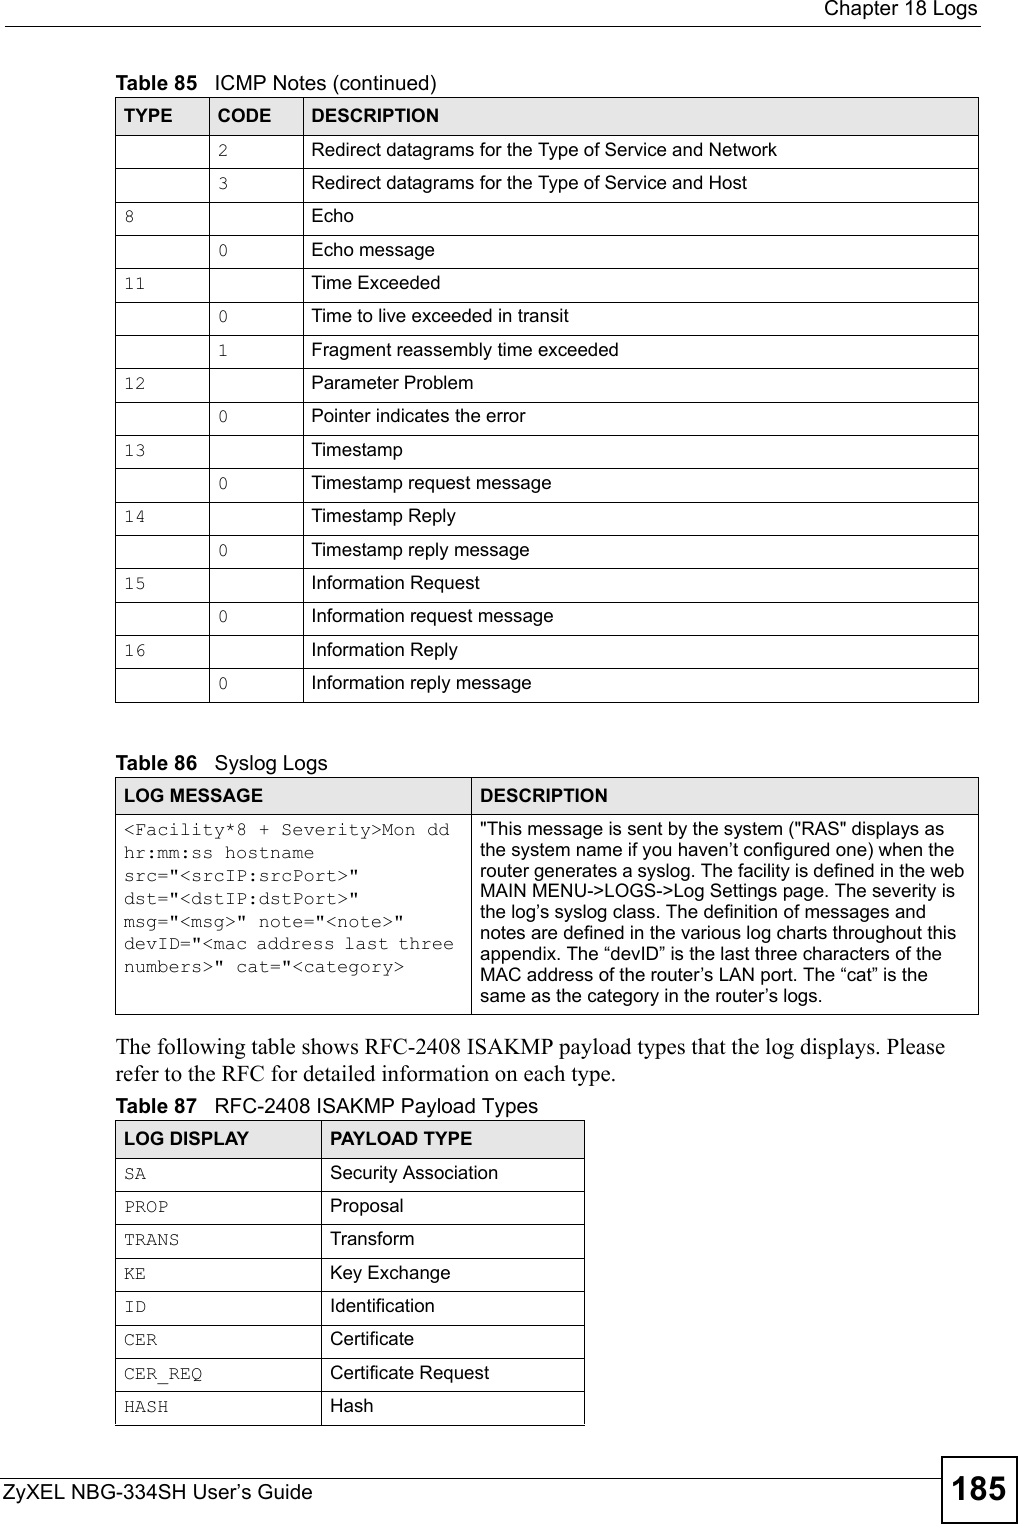  Chapter 18 LogsZyXEL NBG-334SH User’s Guide 185 The following table shows RFC-2408 ISAKMP payload types that the log displays. Please refer to the RFC for detailed information on each type. 2Redirect datagrams for the Type of Service and Network3Redirect datagrams for the Type of Service and Host8Echo0Echo message11 Time Exceeded0Time to live exceeded in transit1Fragment reassembly time exceeded12 Parameter Problem0Pointer indicates the error13 Timestamp0Timestamp request message14 Timestamp Reply0Timestamp reply message15 Information Request0Information request message16 Information Reply0Information reply messageTable 86   Syslog LogsLOG MESSAGE DESCRIPTION&lt;Facility*8 + Severity&gt;Mon dd hr:mm:ss hostname src=&quot;&lt;srcIP:srcPort&gt;&quot; dst=&quot;&lt;dstIP:dstPort&gt;&quot; msg=&quot;&lt;msg&gt;&quot; note=&quot;&lt;note&gt;&quot; devID=&quot;&lt;mac address last three numbers&gt;&quot; cat=&quot;&lt;category&gt;&quot;This message is sent by the system (&quot;RAS&quot; displays as the system name if you haven’t configured one) when the router generates a syslog. The facility is defined in the web MAIN MENU-&gt;LOGS-&gt;Log Settings page. The severity is the log’s syslog class. The definition of messages and notes are defined in the various log charts throughout this appendix. The “devID” is the last three characters of the MAC address of the router’s LAN port. The “cat” is the same as the category in the router’s logs.Table 87   RFC-2408 ISAKMP Payload TypesLOG DISPLAY PAYLOAD TYPESA Security AssociationPROP ProposalTRANS TransformKE Key ExchangeID IdentificationCER CertificateCER_REQ Certificate RequestHASH HashTable 85   ICMP Notes (continued)TYPE CODE DESCRIPTION